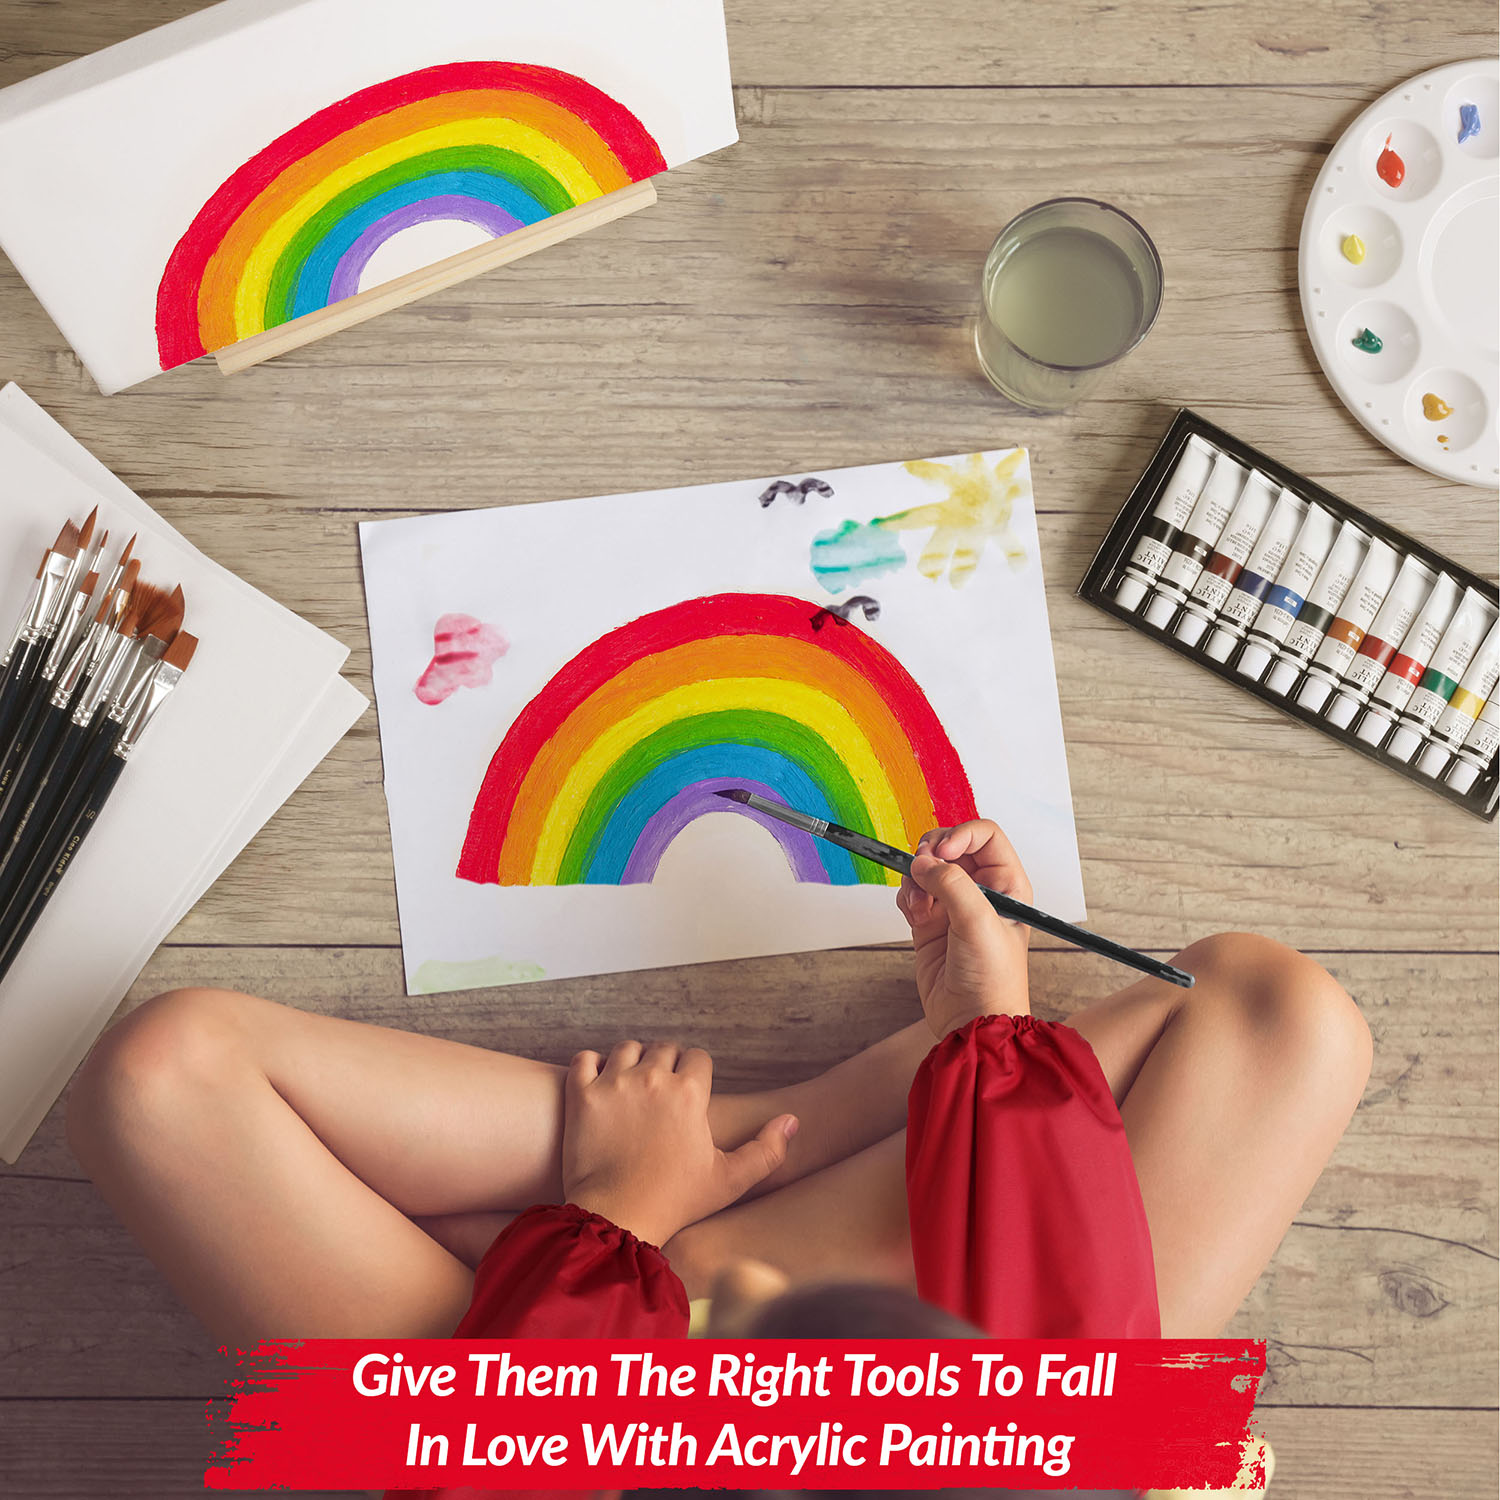 Give Kids The Tools To Fall In Love With Acrylic Painting